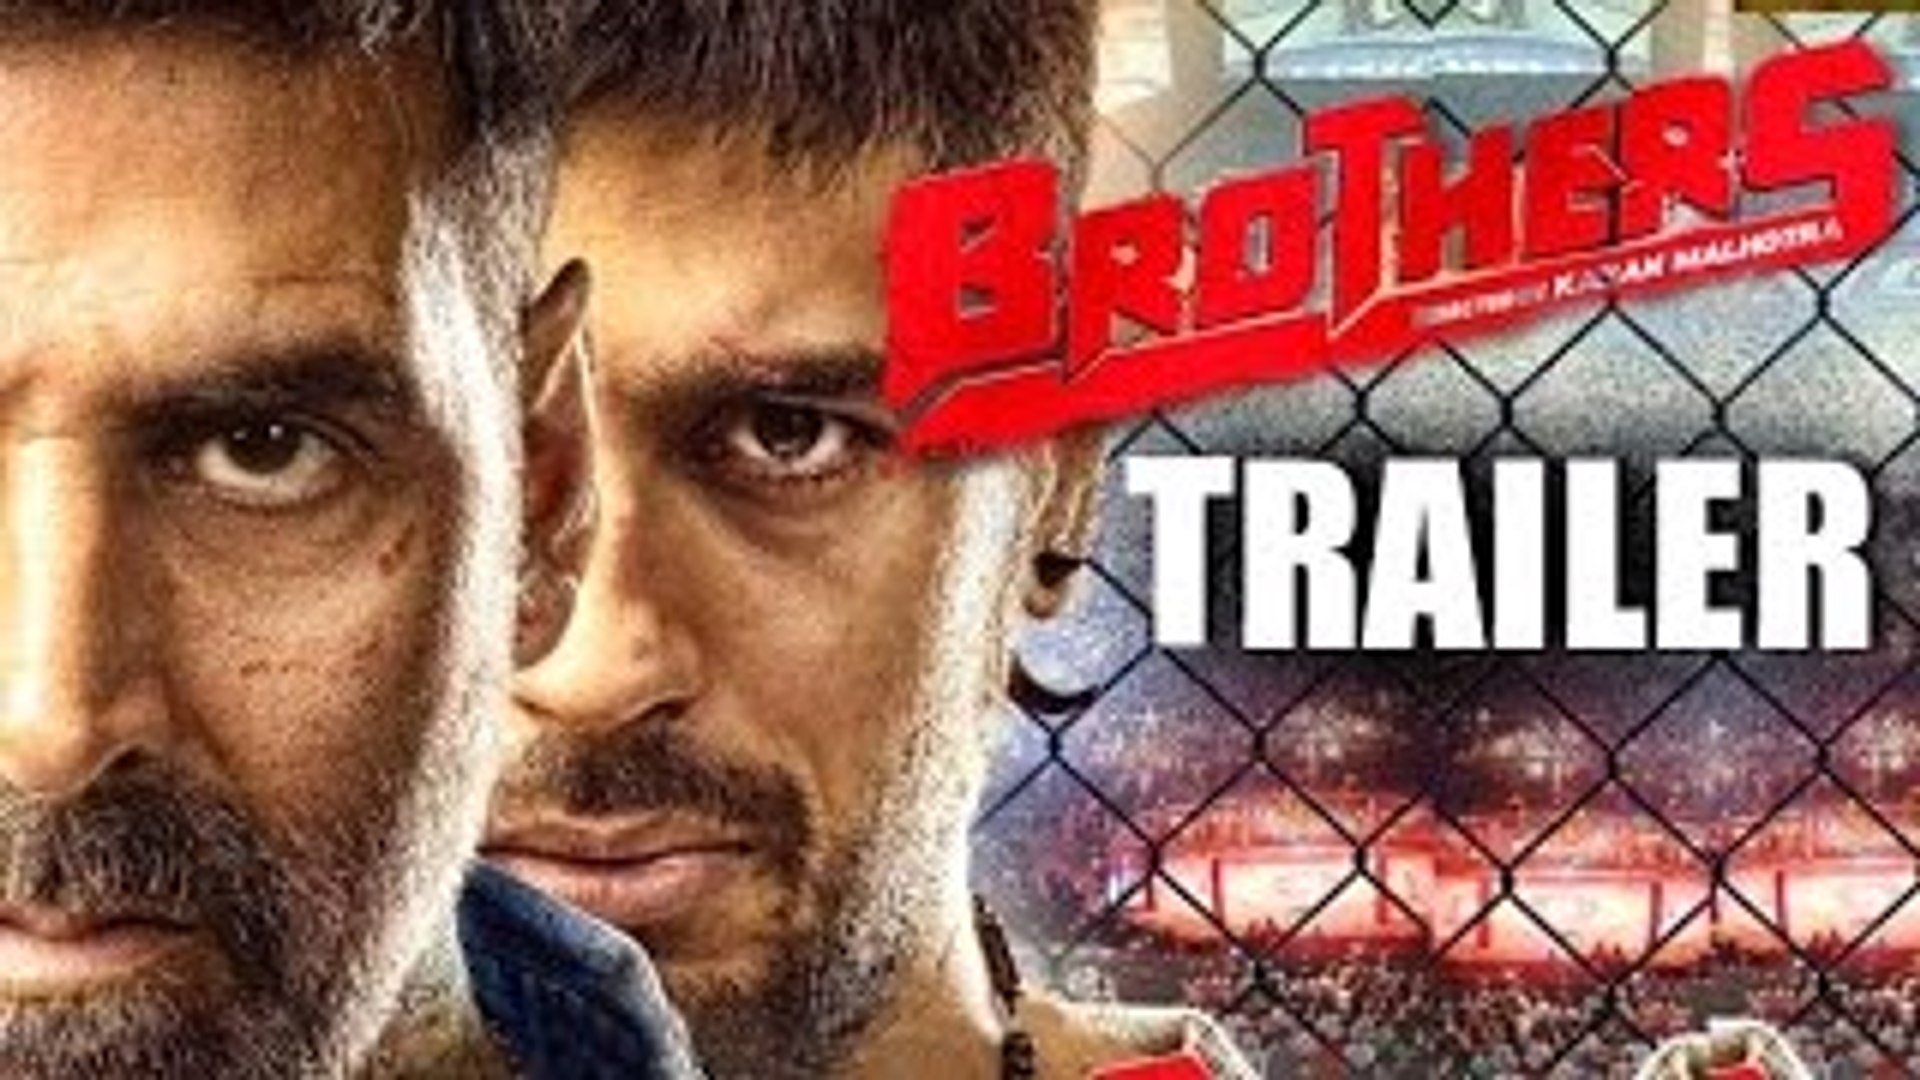 Brothers Trailer 2015 - Akshay Kumar, Jacqueline Fernandez, Sidharth Malhotra - First Look - The Bollywood picture